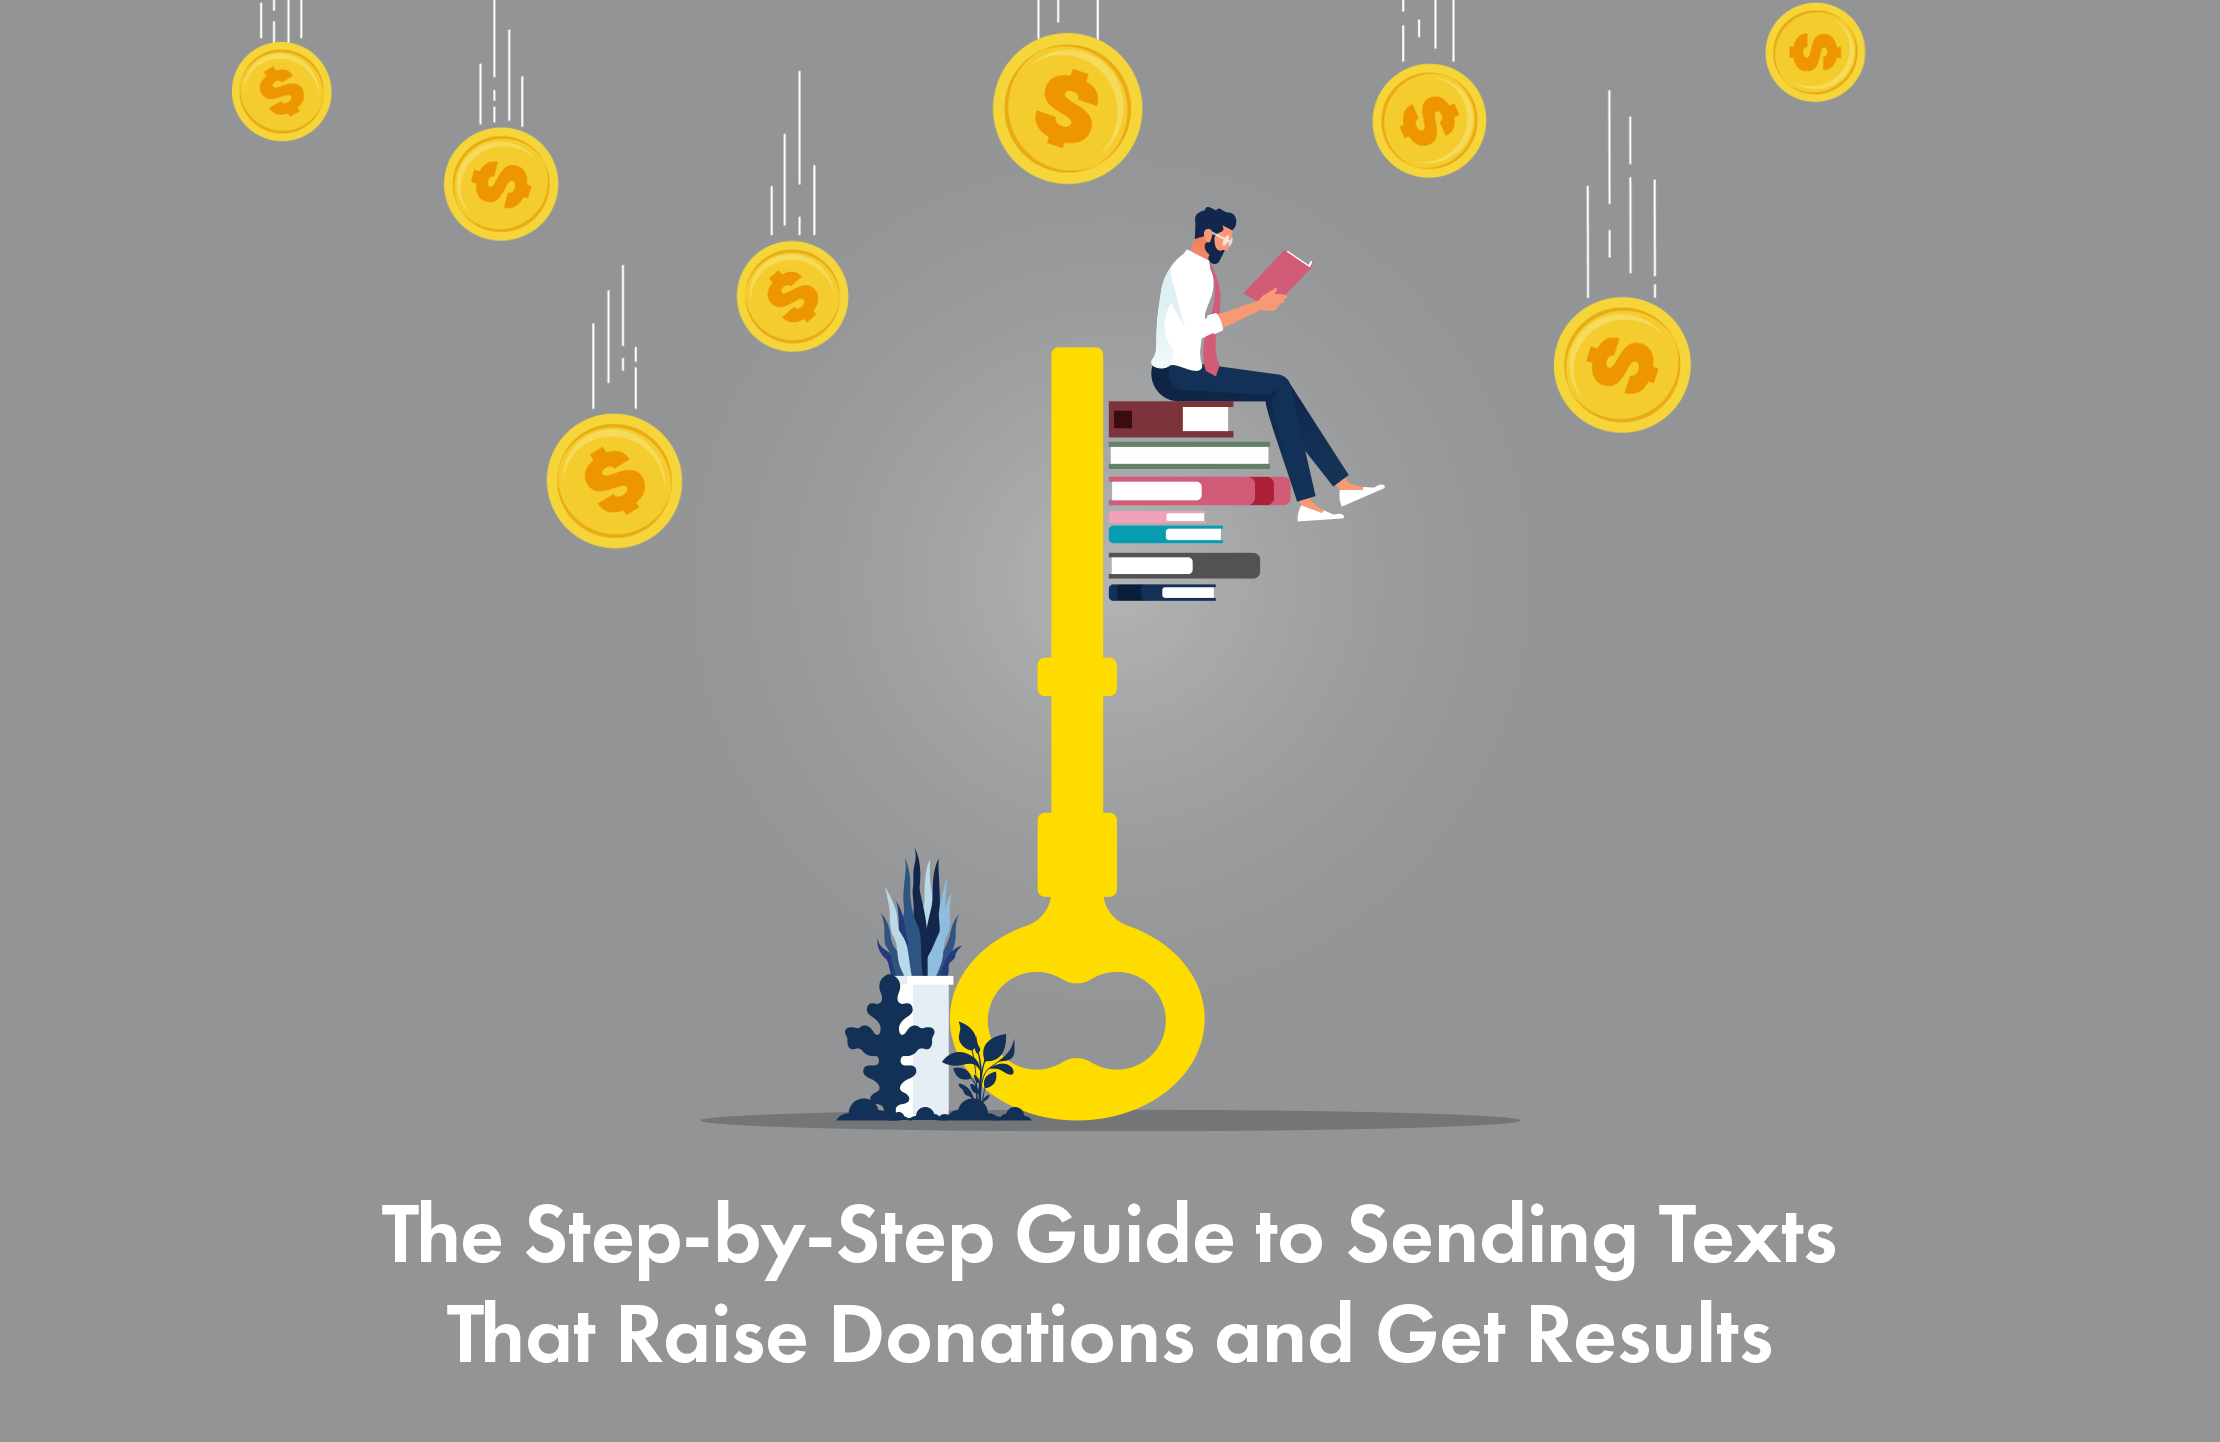 The Step-by-Step Guide to Sending Texts That Raise Donations and Get Results